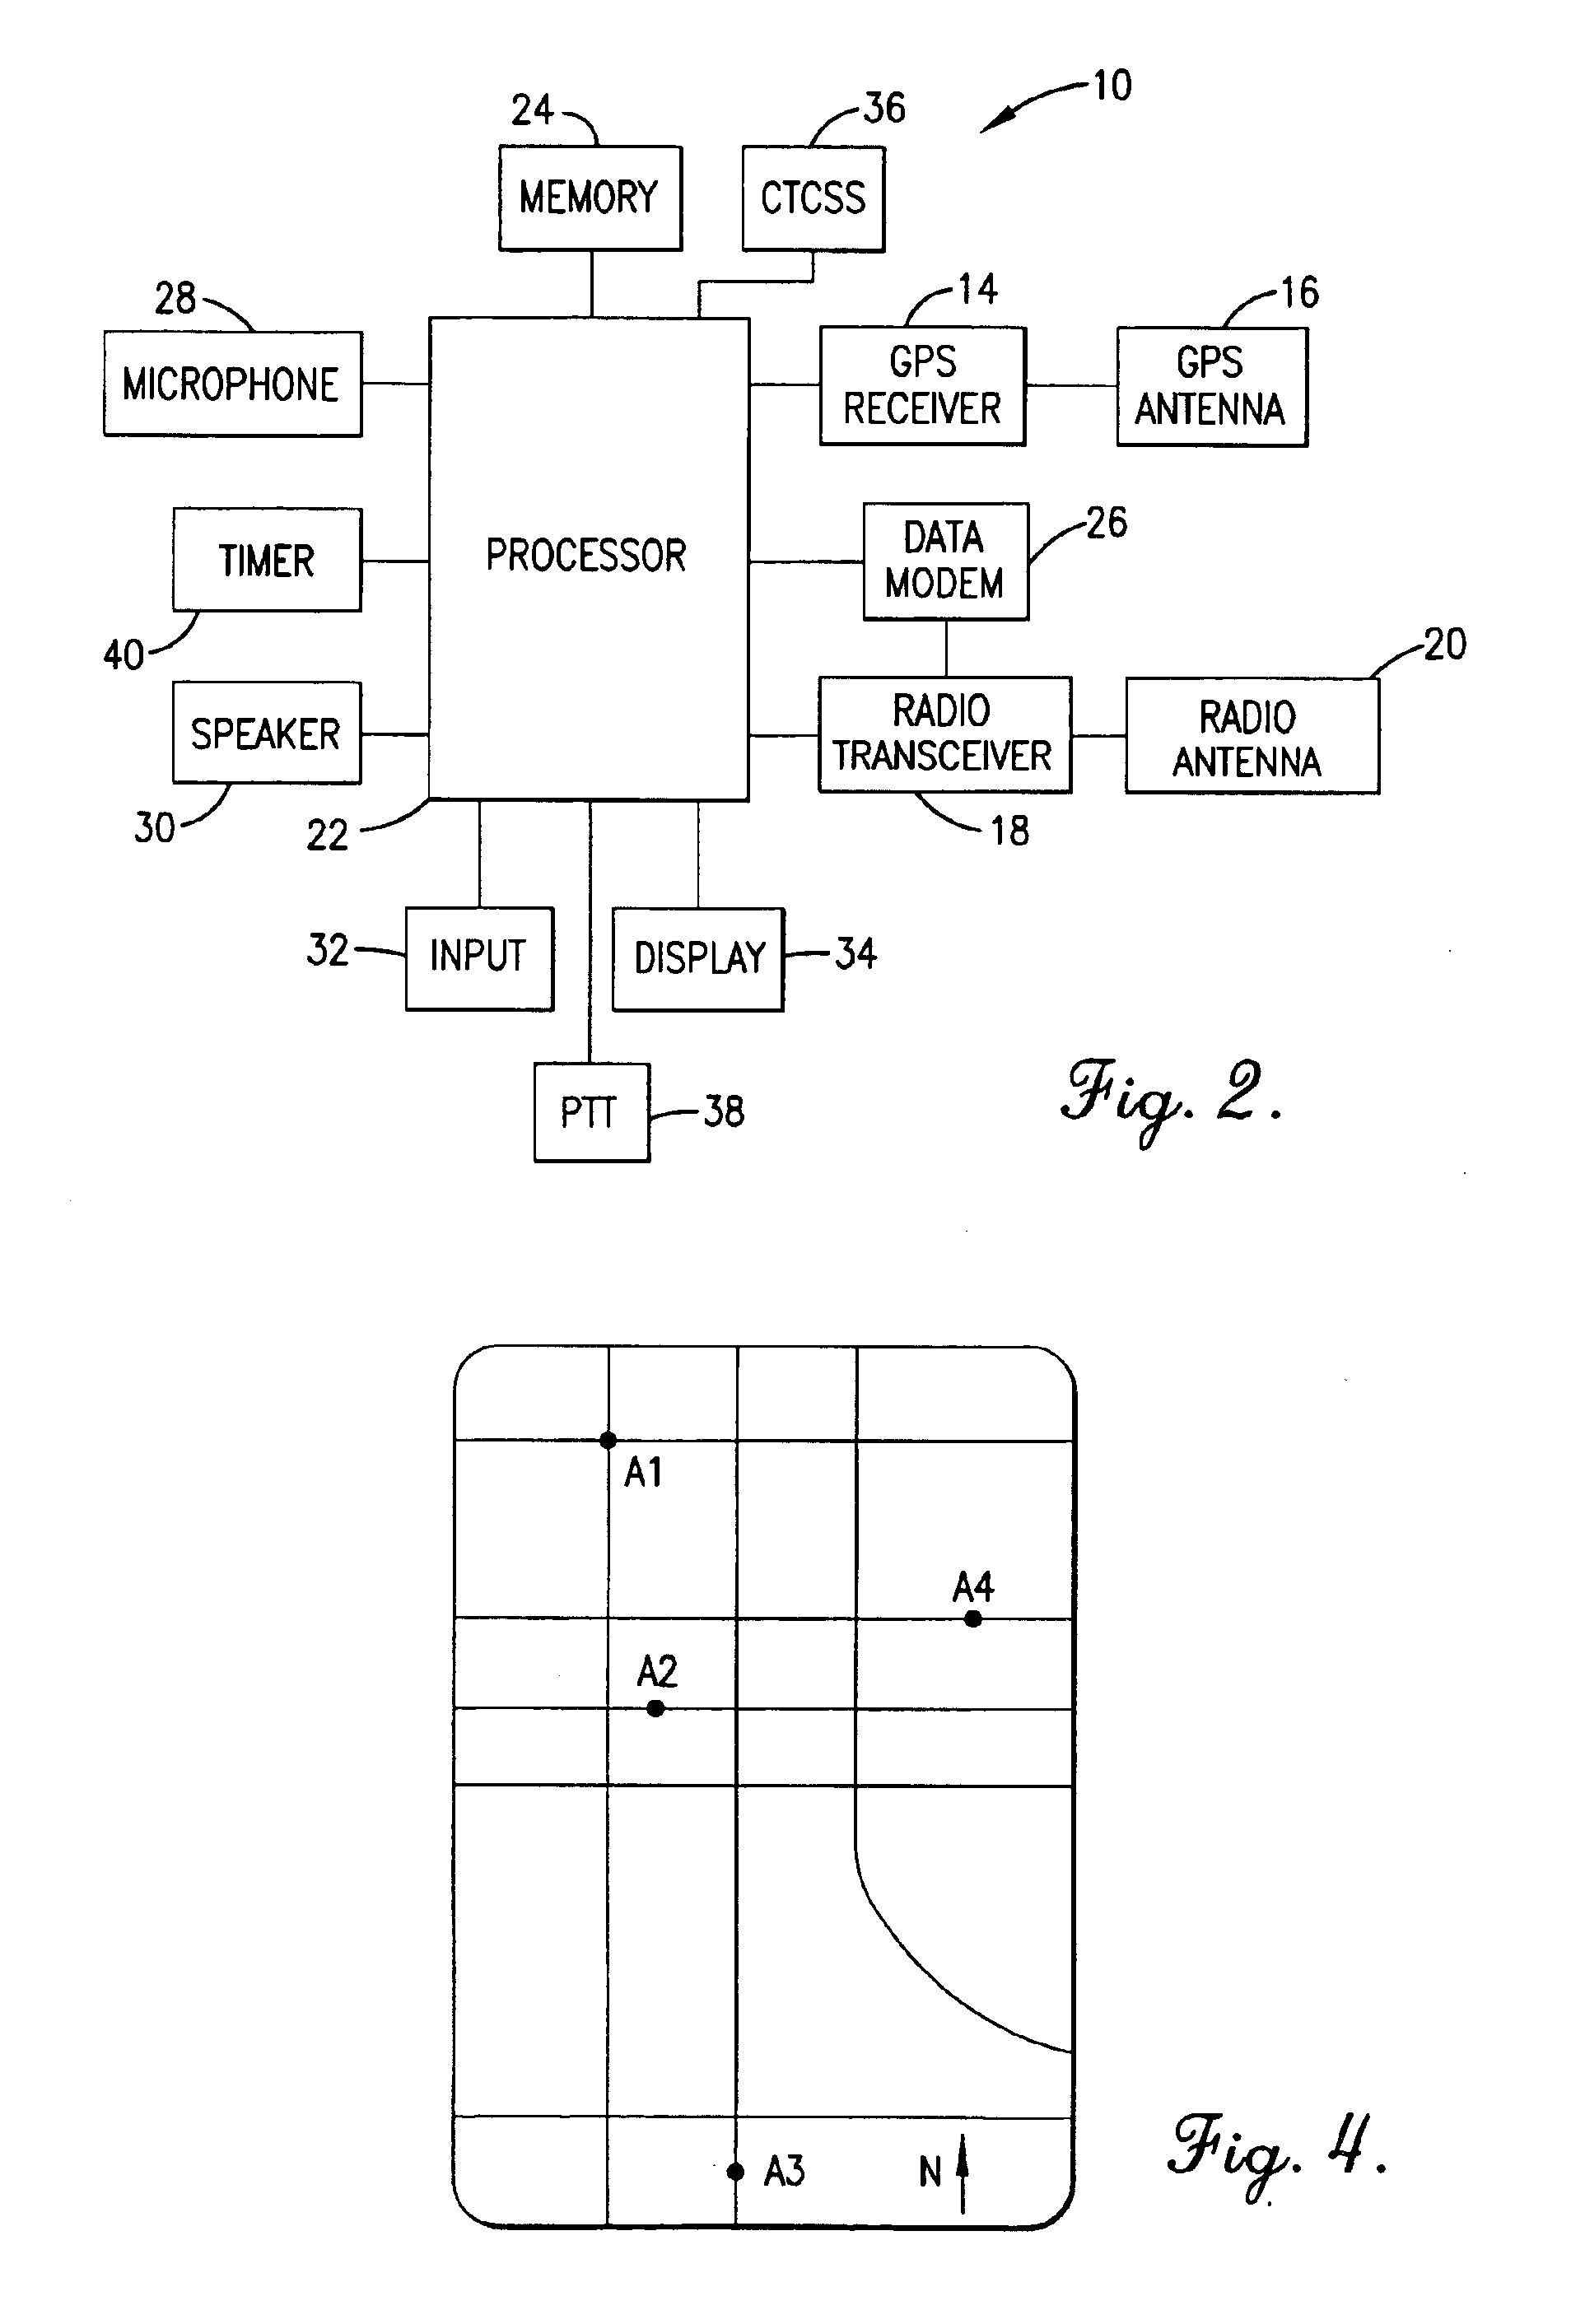 Combined global positioning system receiver and radio with enhanced tracking features